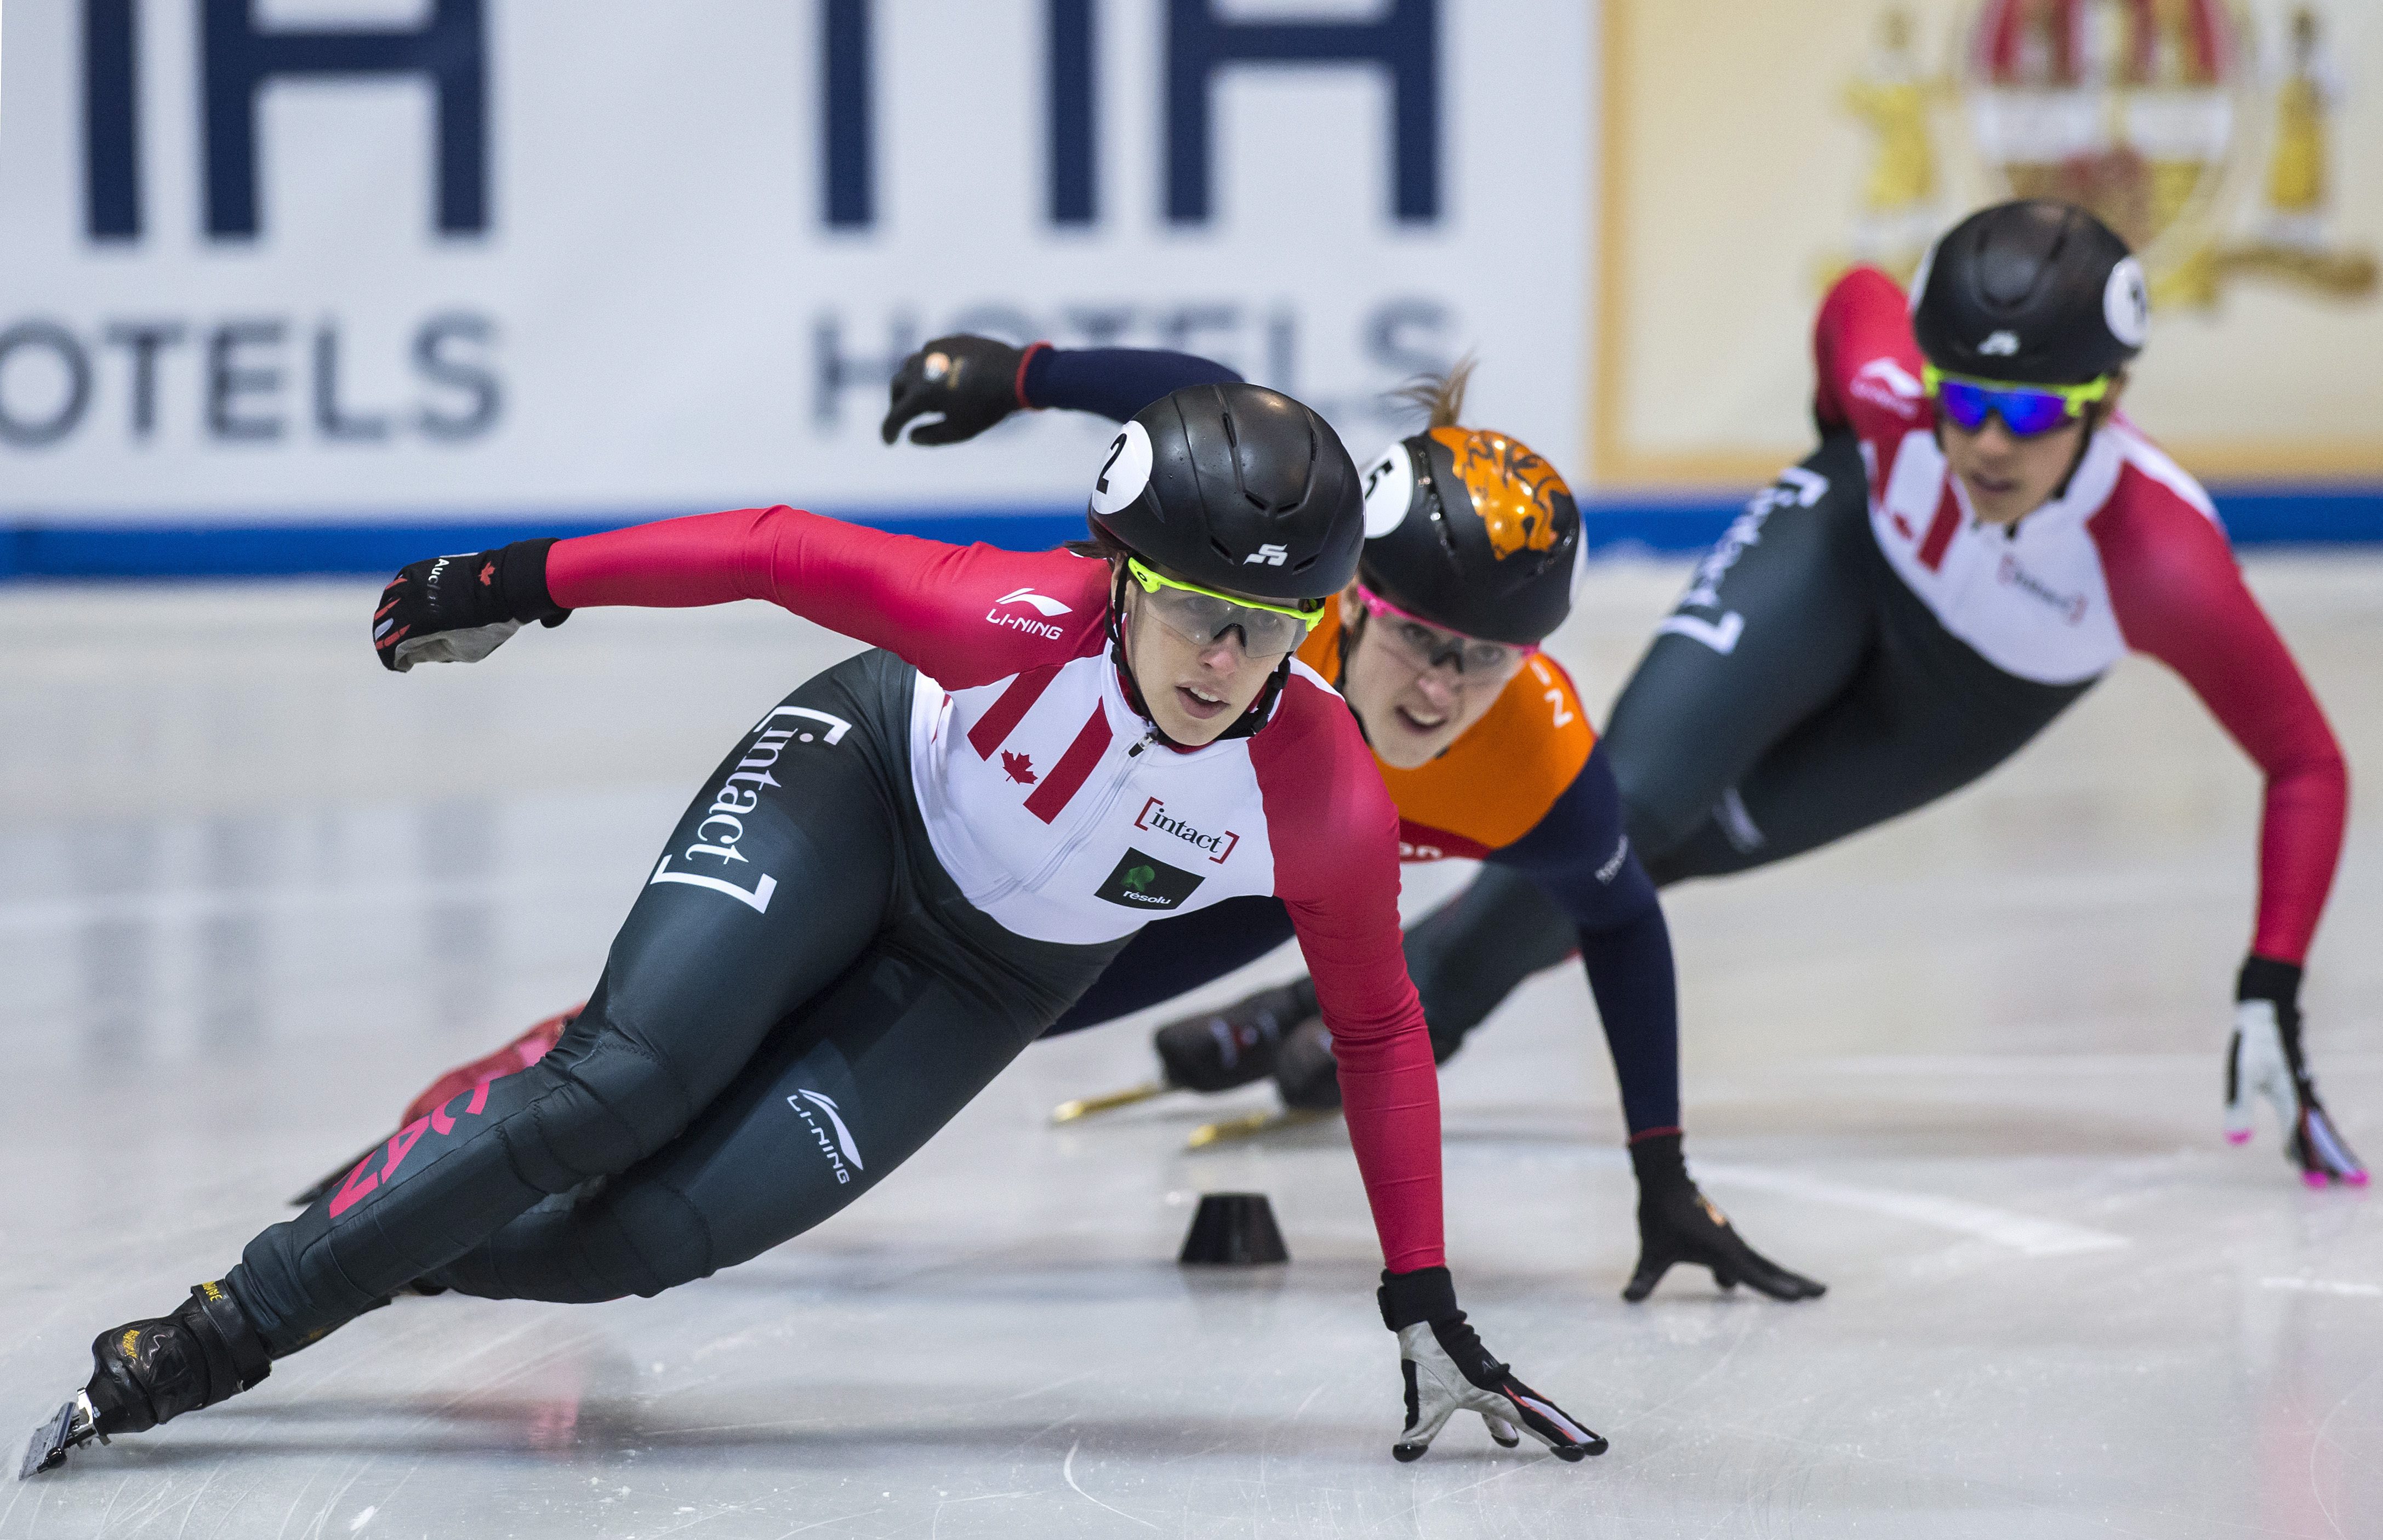 Winner Marianne St-Gelais of Canada, left, skates in front of second placed Suzanne Schulting of Netherlands, center, and third placed Valerie Maltais of Canada, right, during the women 1,000 meters final race at the short track speed skating World Cup in Dresden, Germany, Saturday, Feb. 4, 2017. (AP Photo/Jens Meyer)